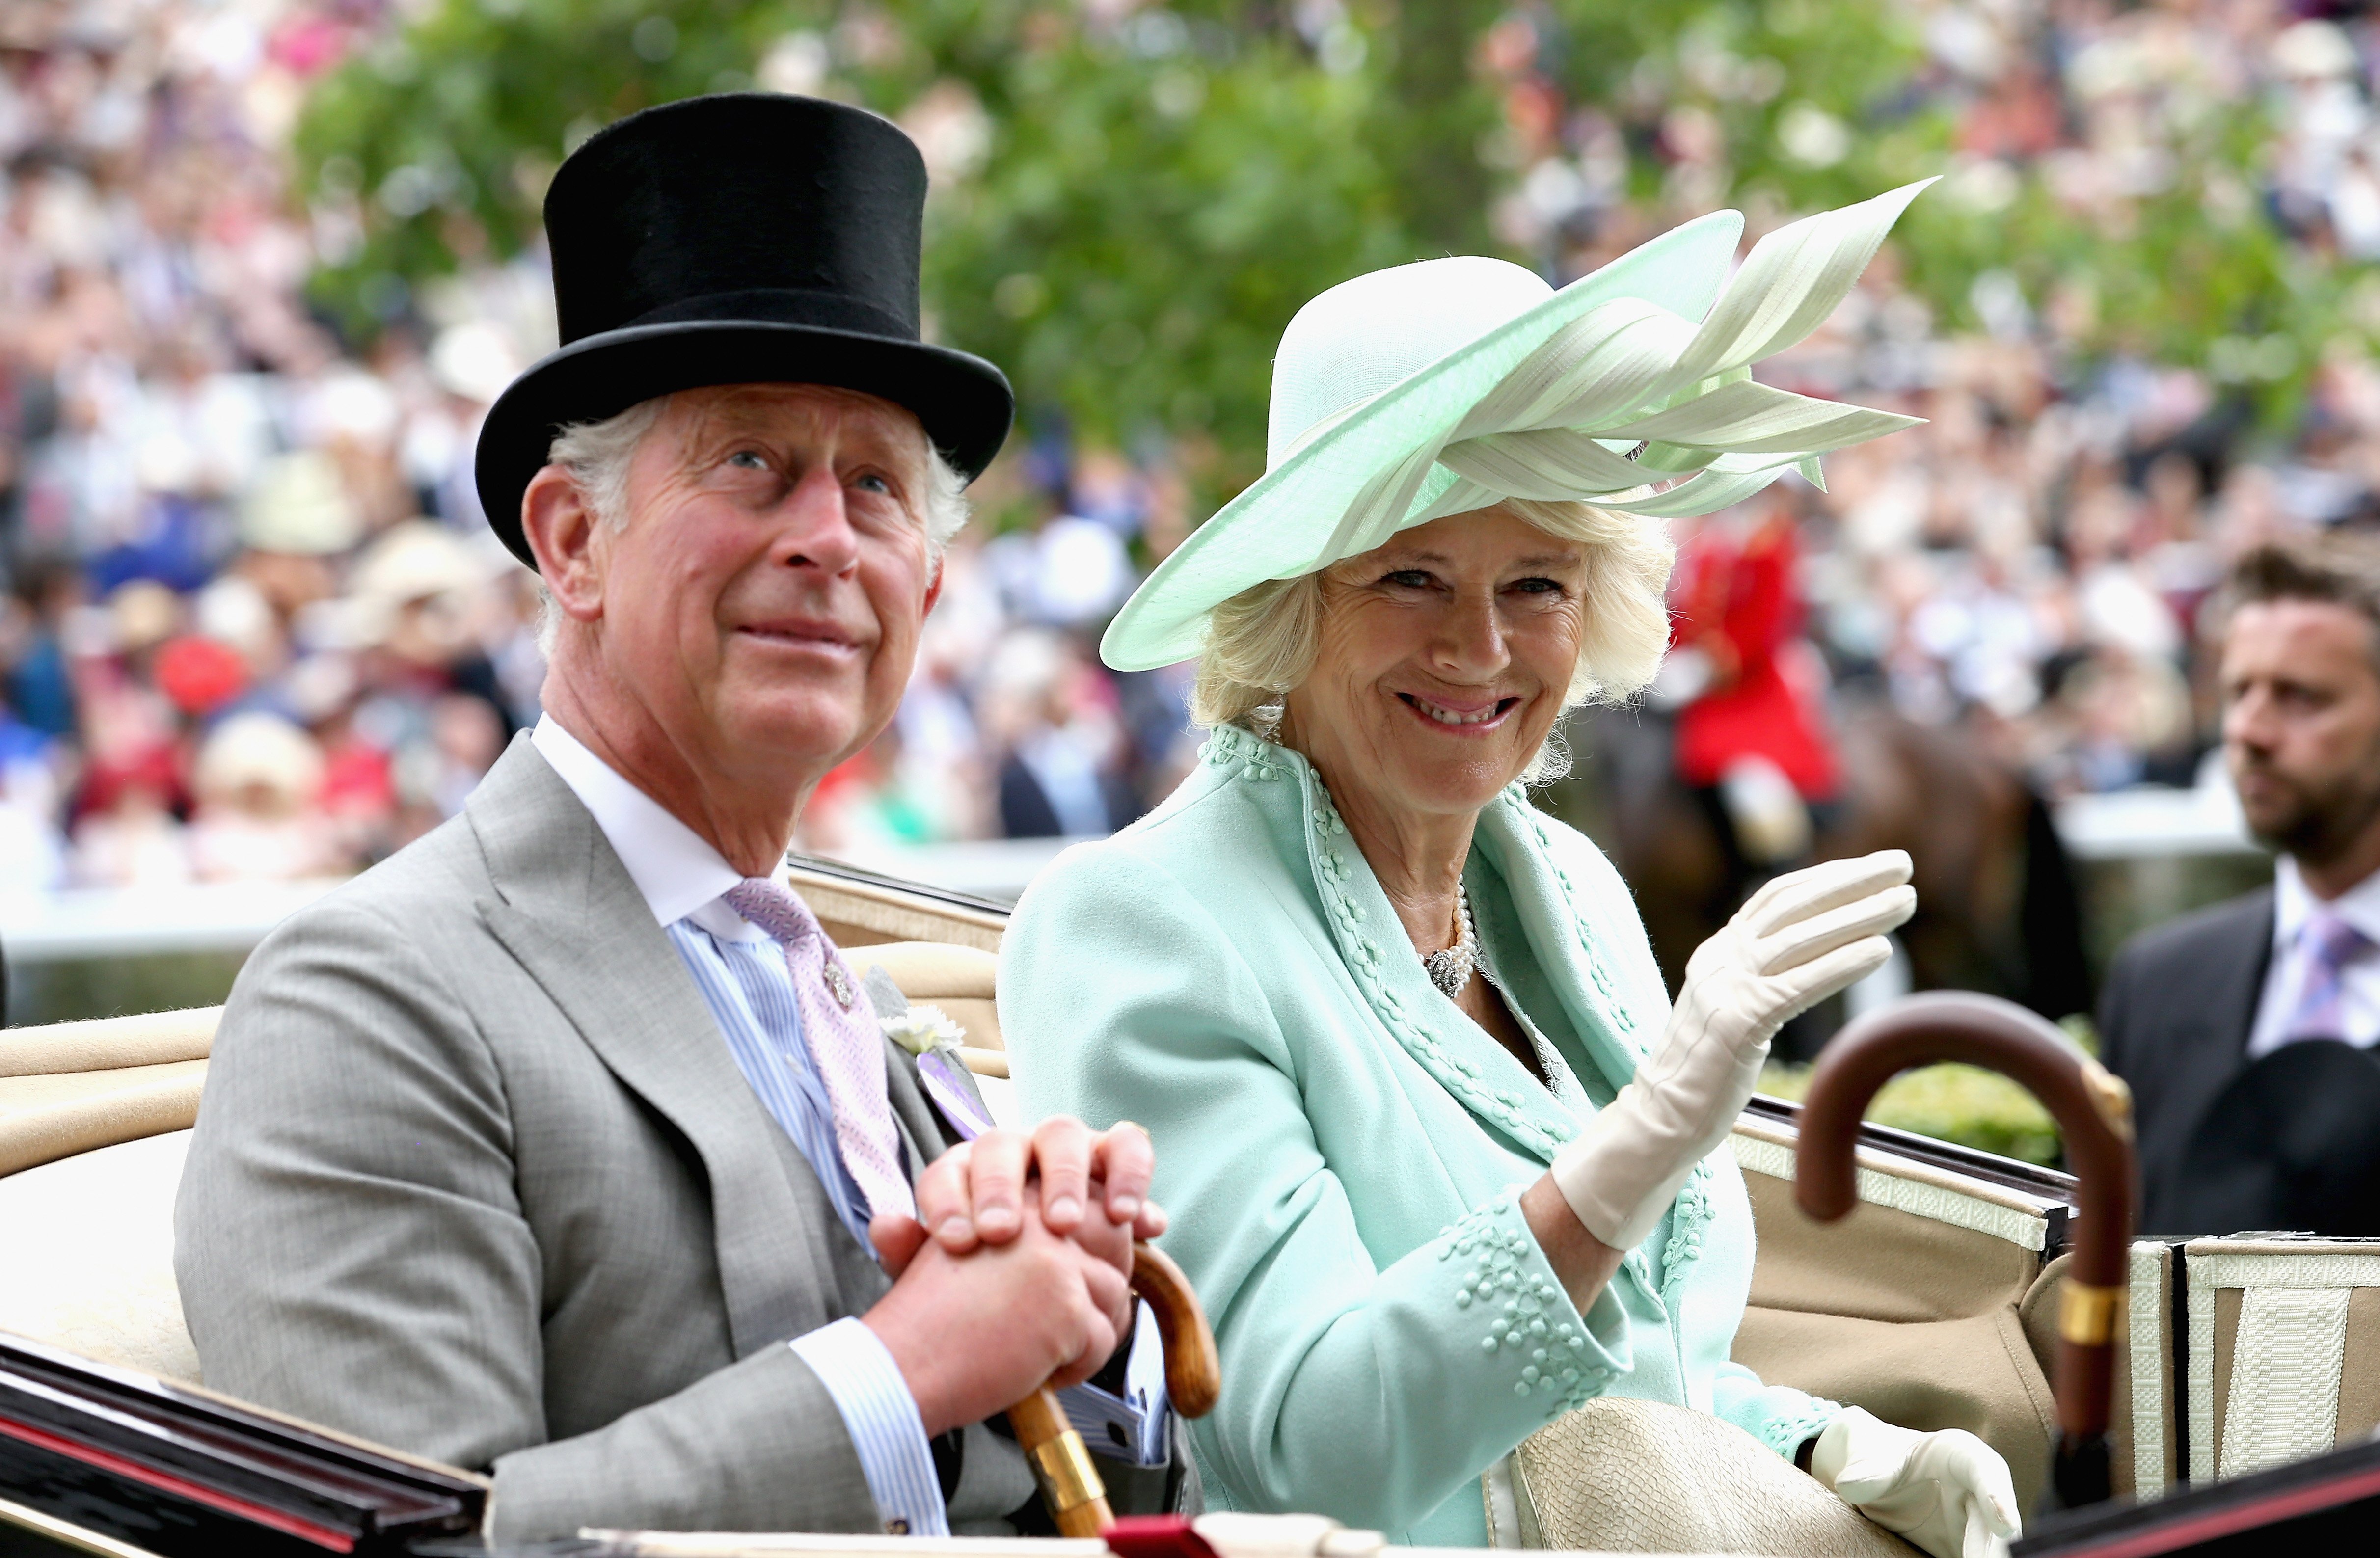 King Charles III and Queen Consort Camilla in Ascot, England 2015. | Source: Getty Images 